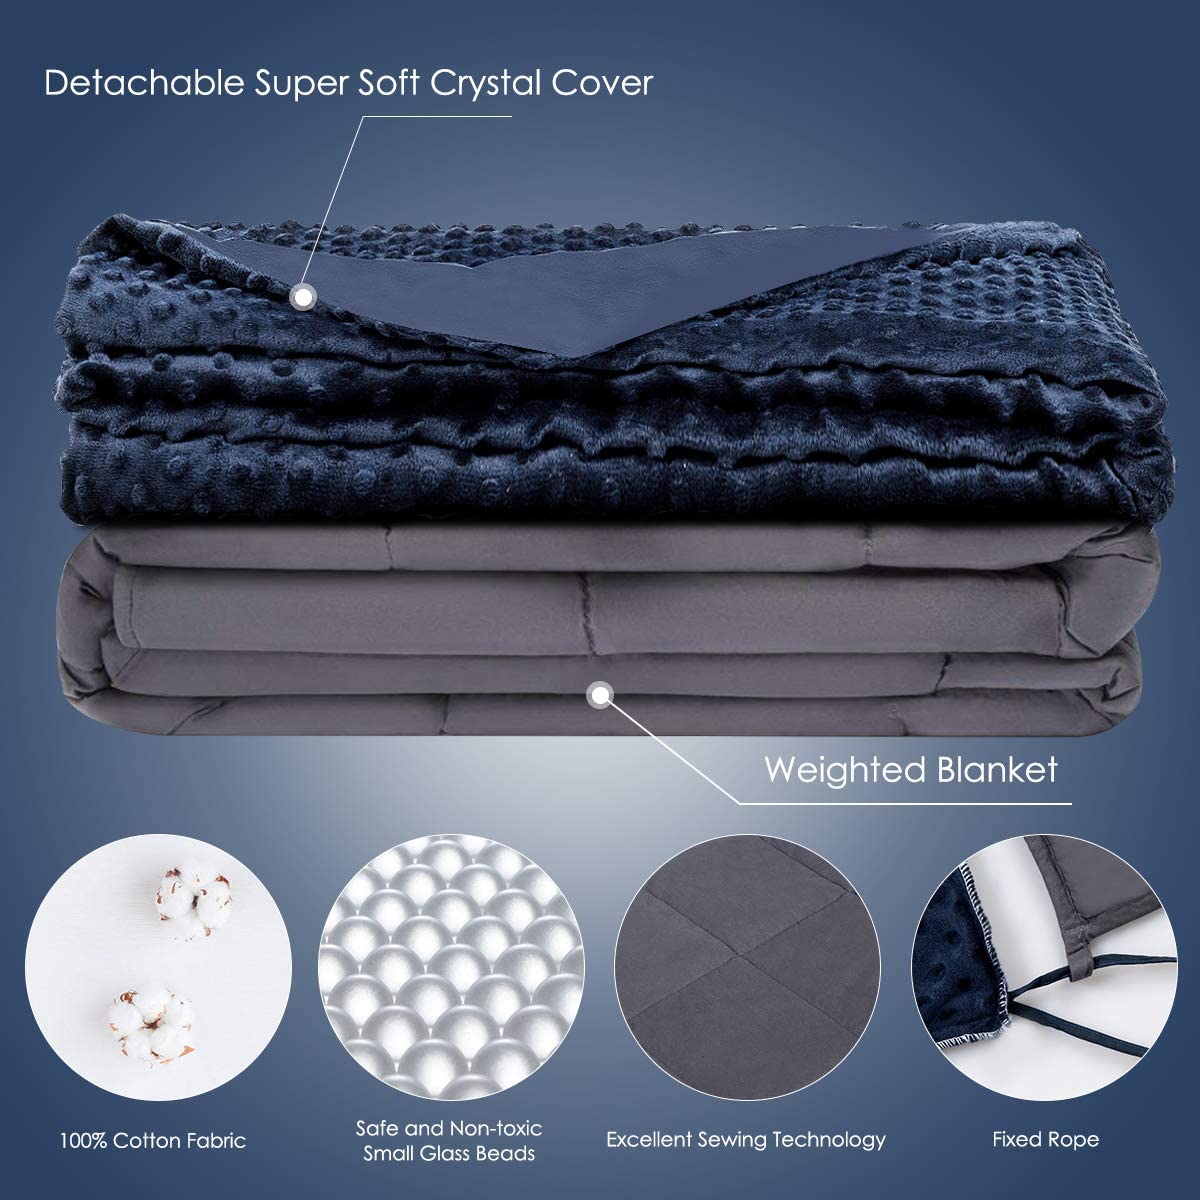 Adult Weighted Blanket & Removable Duvet Cover| 15-25 lbs, 60"x 80" | Queen Size Bed - Giantexus